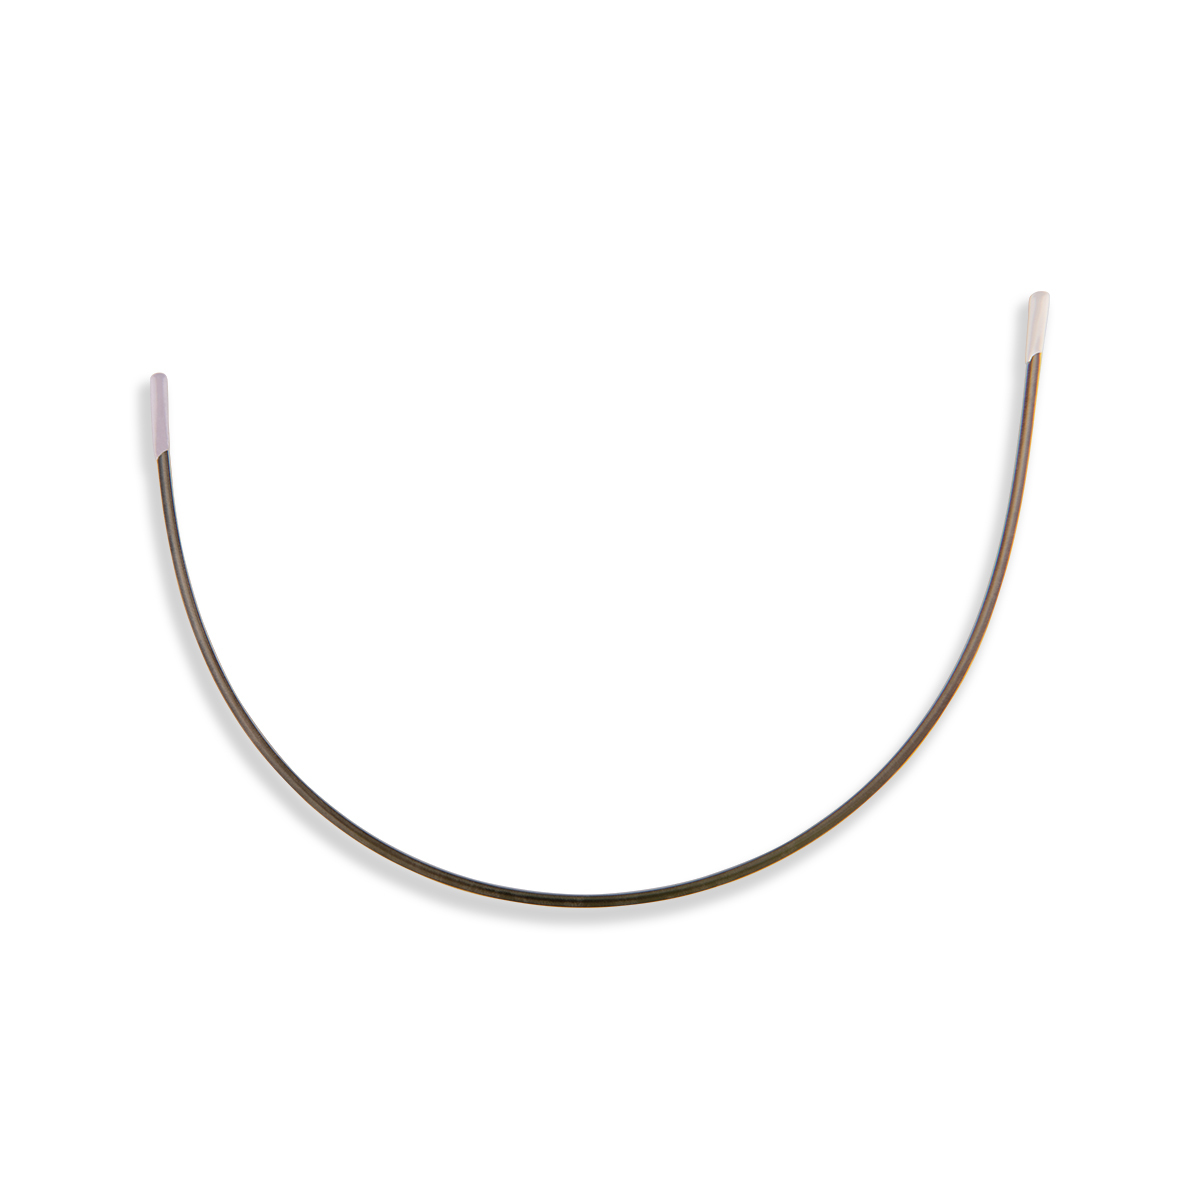 Plunge Bra Underwires Replacement Bra Wires 8 Sizes to Choose From Strong  Flexible Steel Wires for Bra Making DIY Lingerie Supplies -  Canada